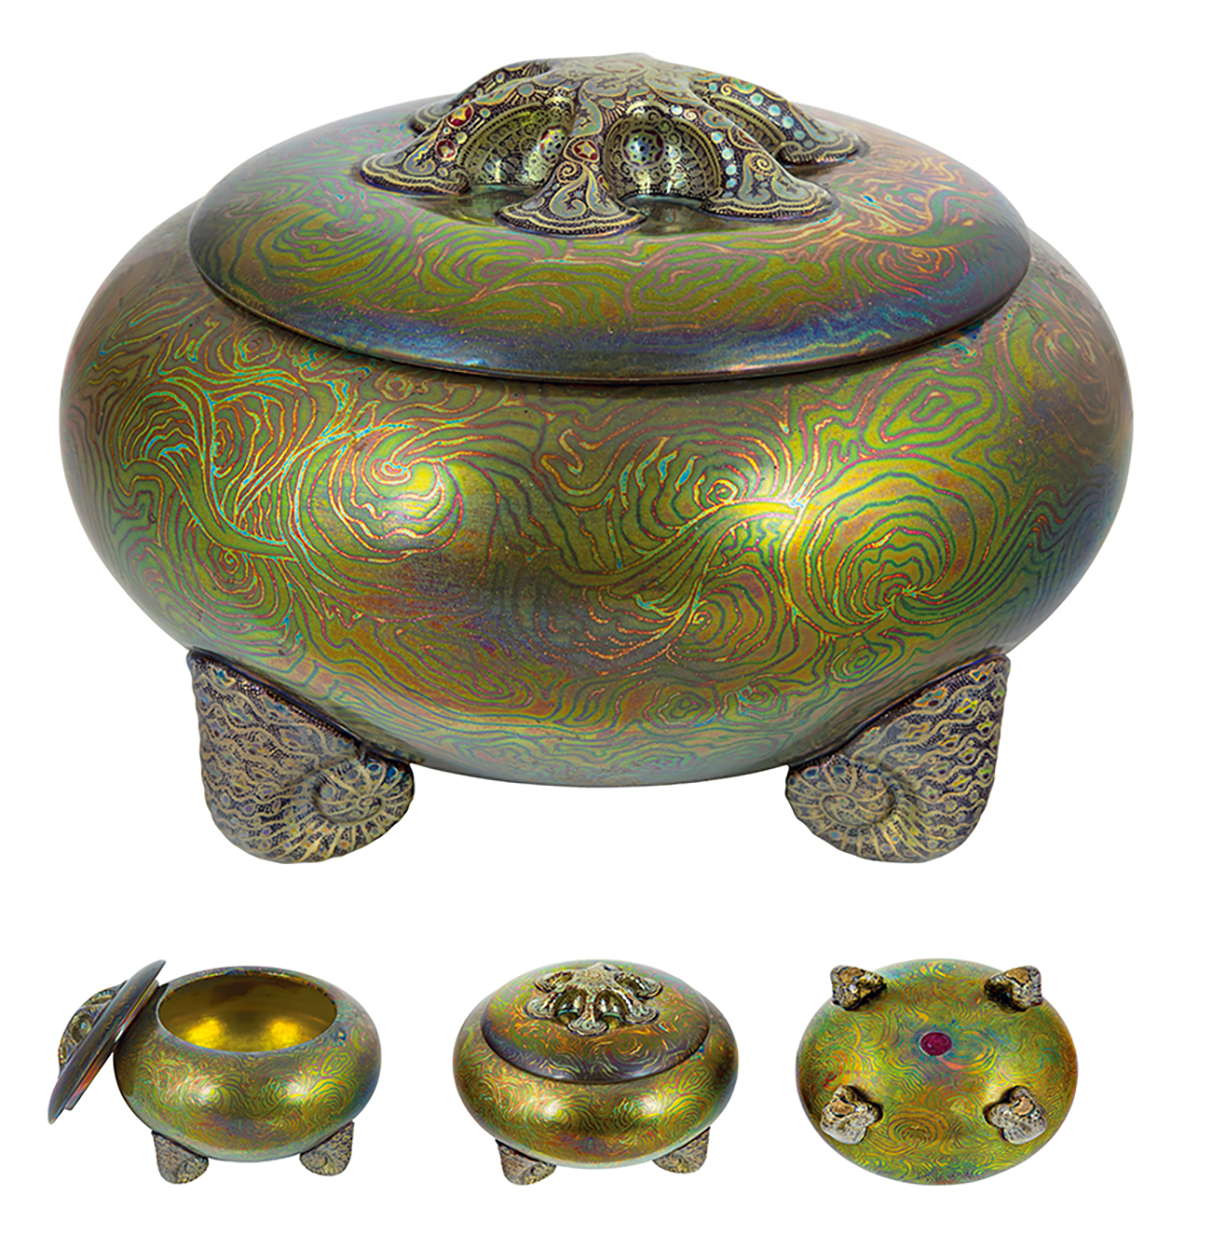 Zsolnay Box with spiral legs, decorated with the so-called Tiffany Technique, Zsolnay, 1913